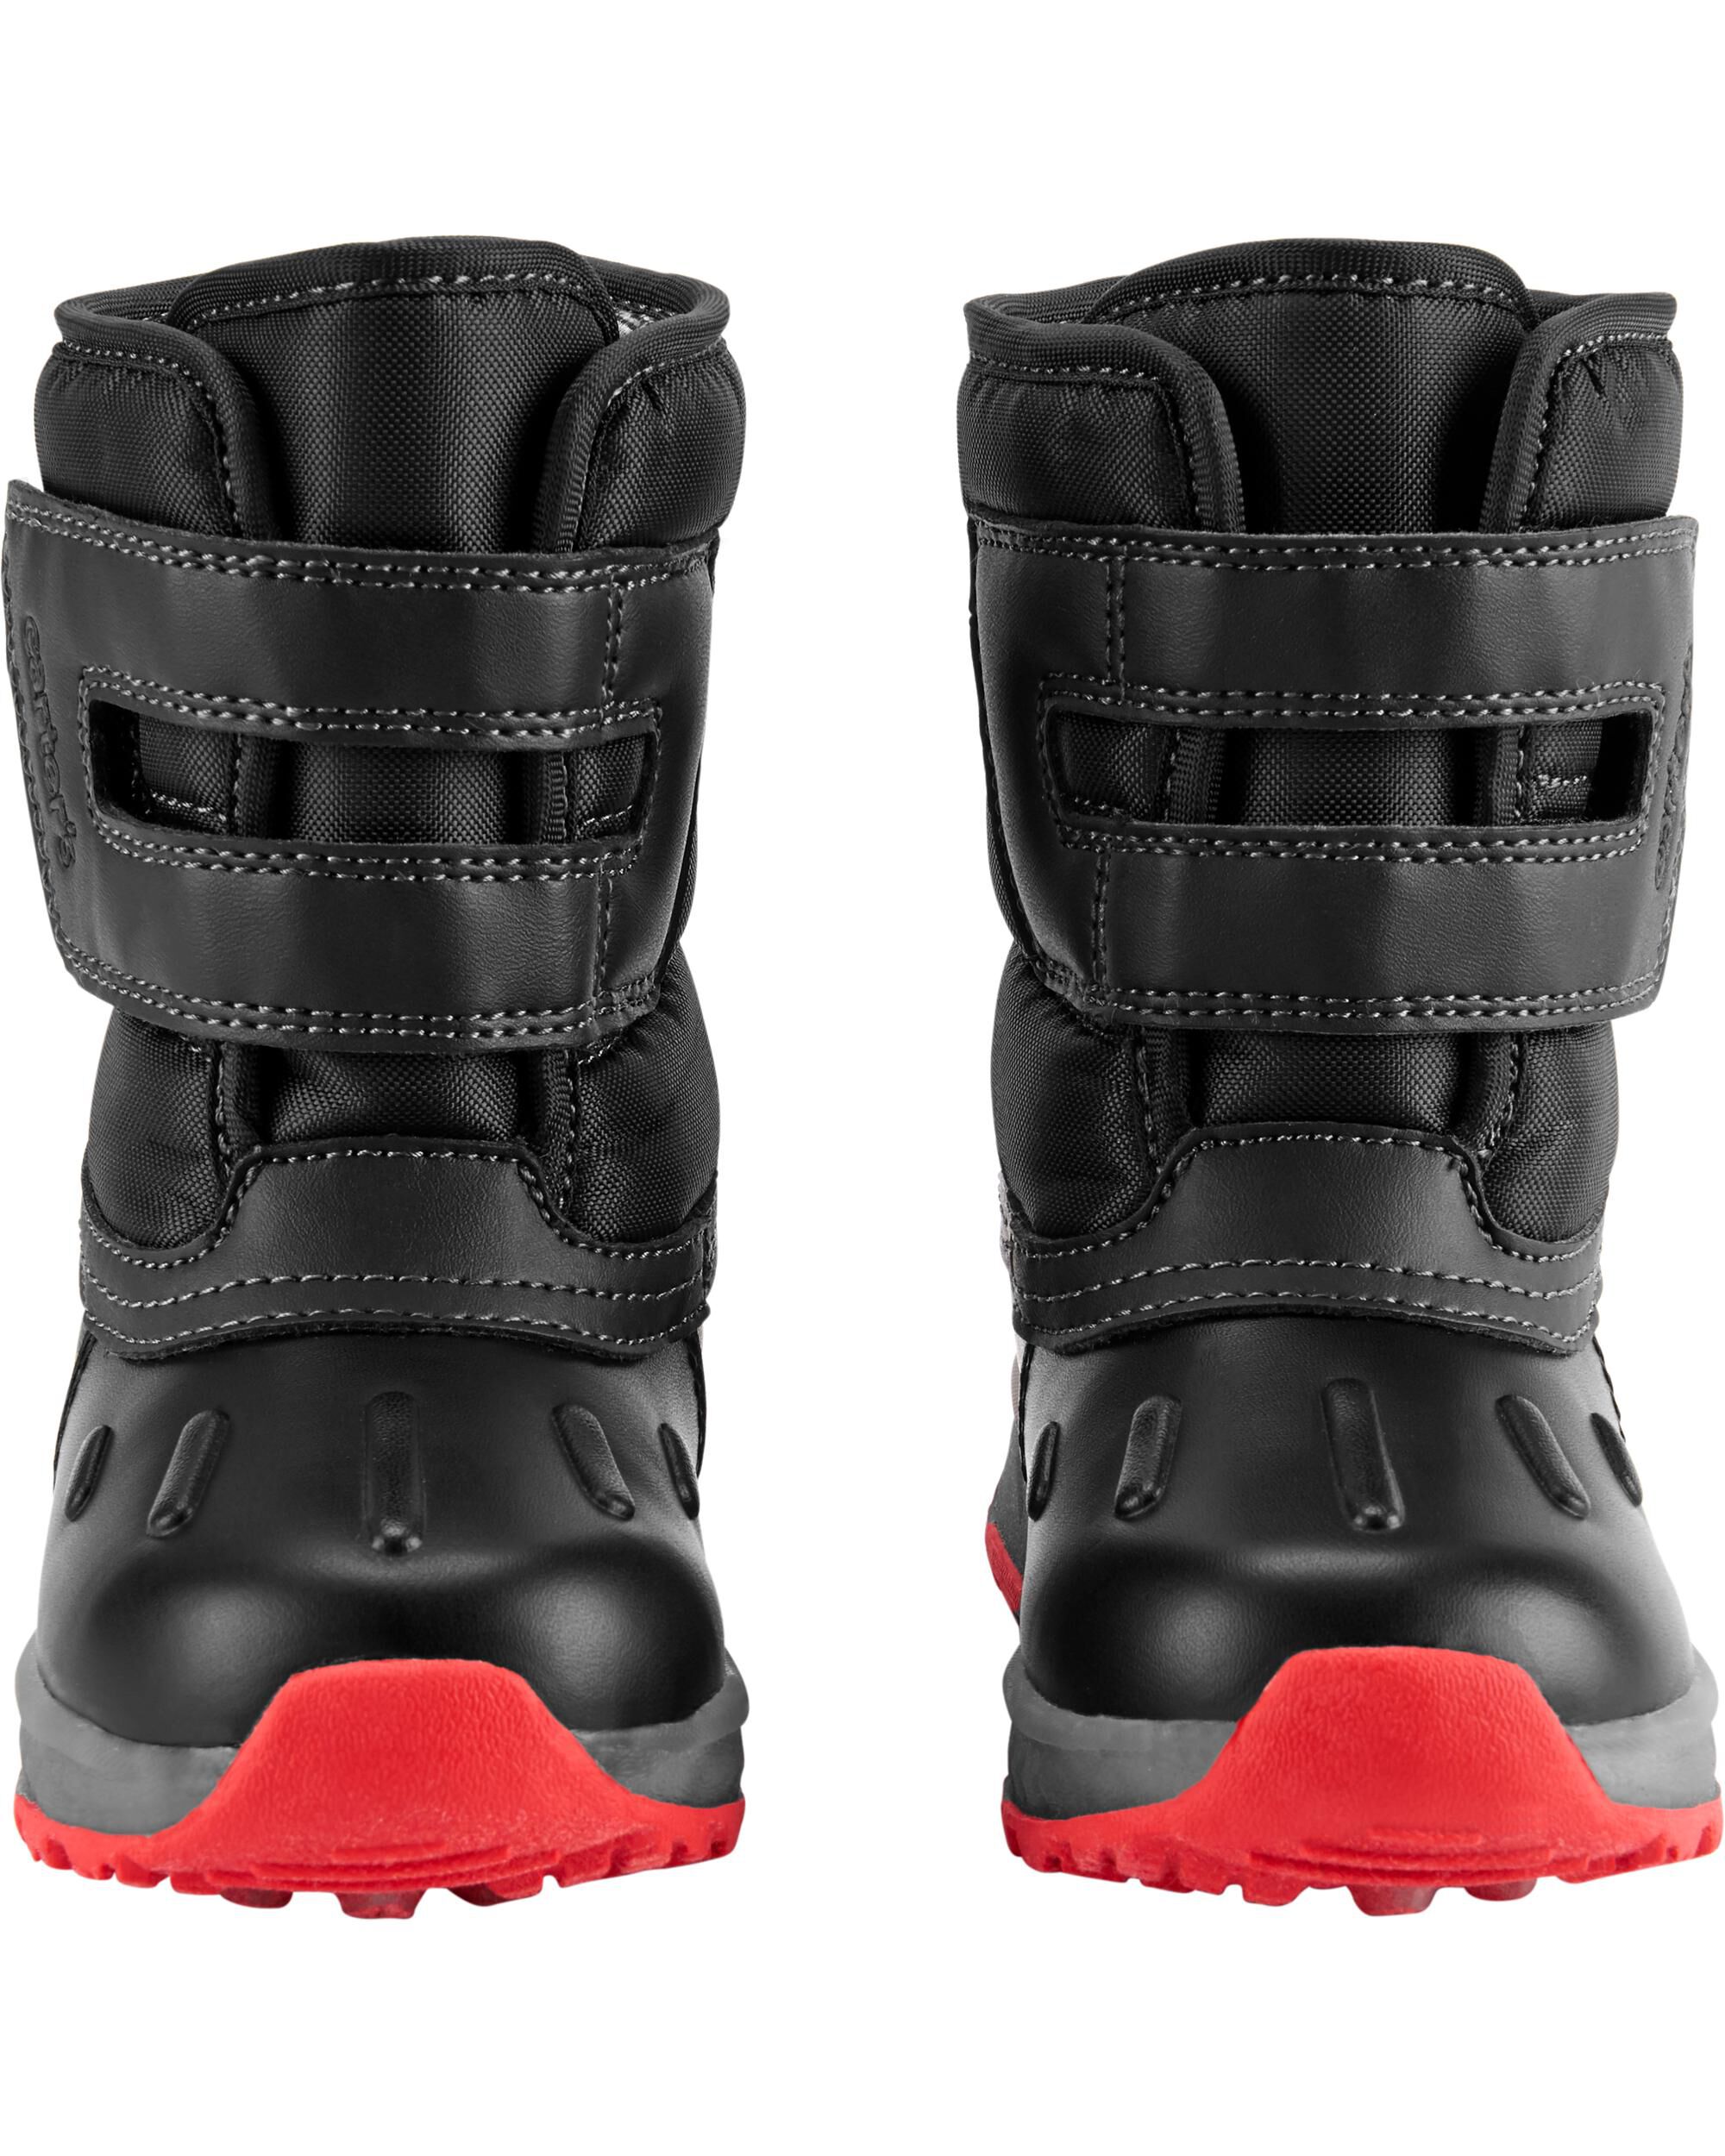 4t snow boots